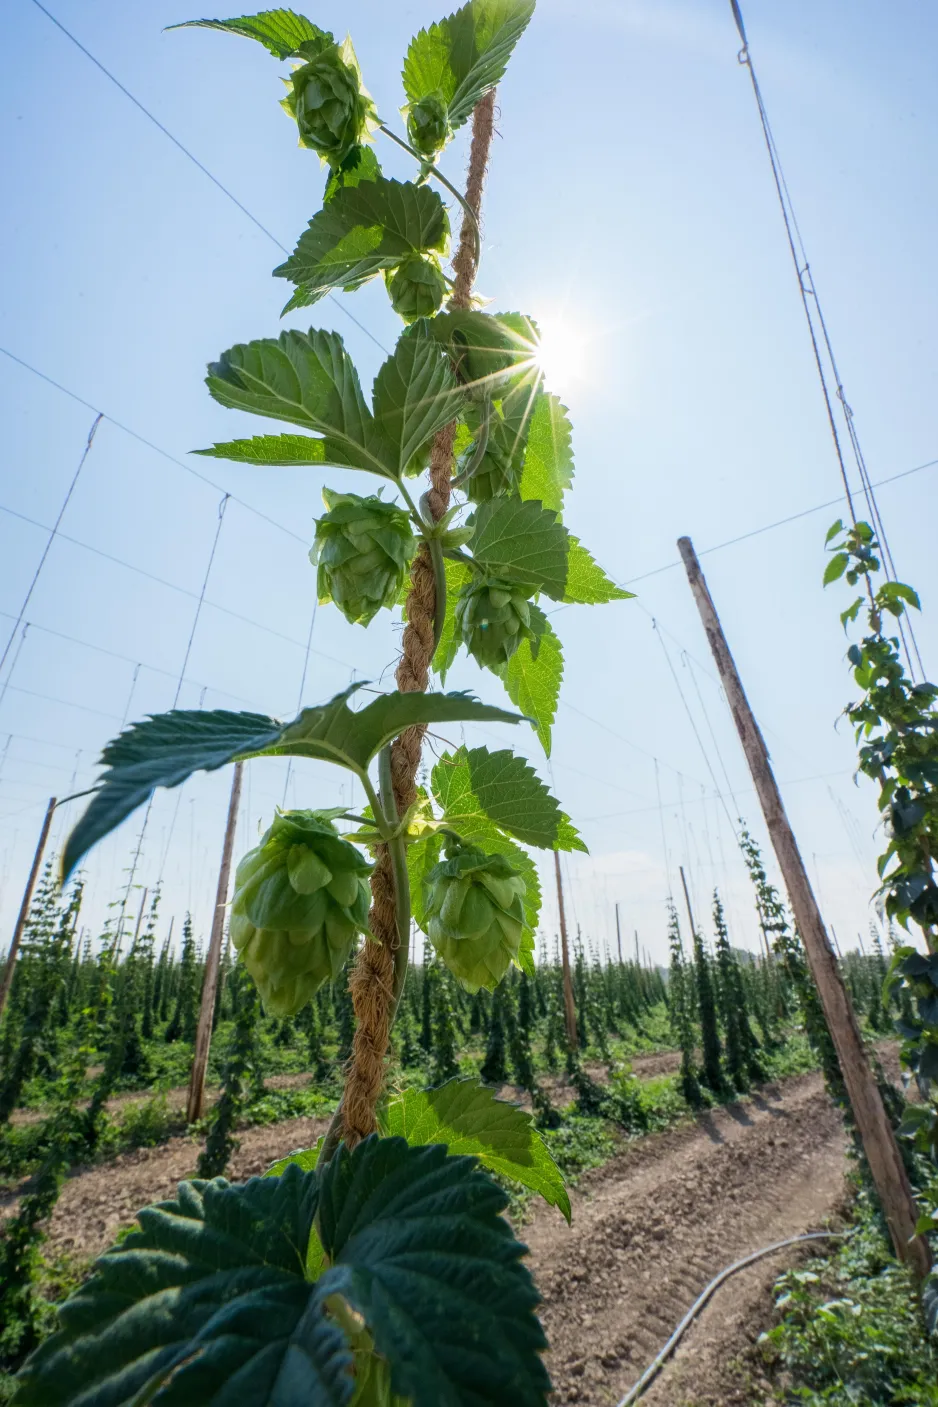 A hop plant in the foreground, growing wrapped around a rope, with a field of growing hops in the background. There are hop cones on the vine. 